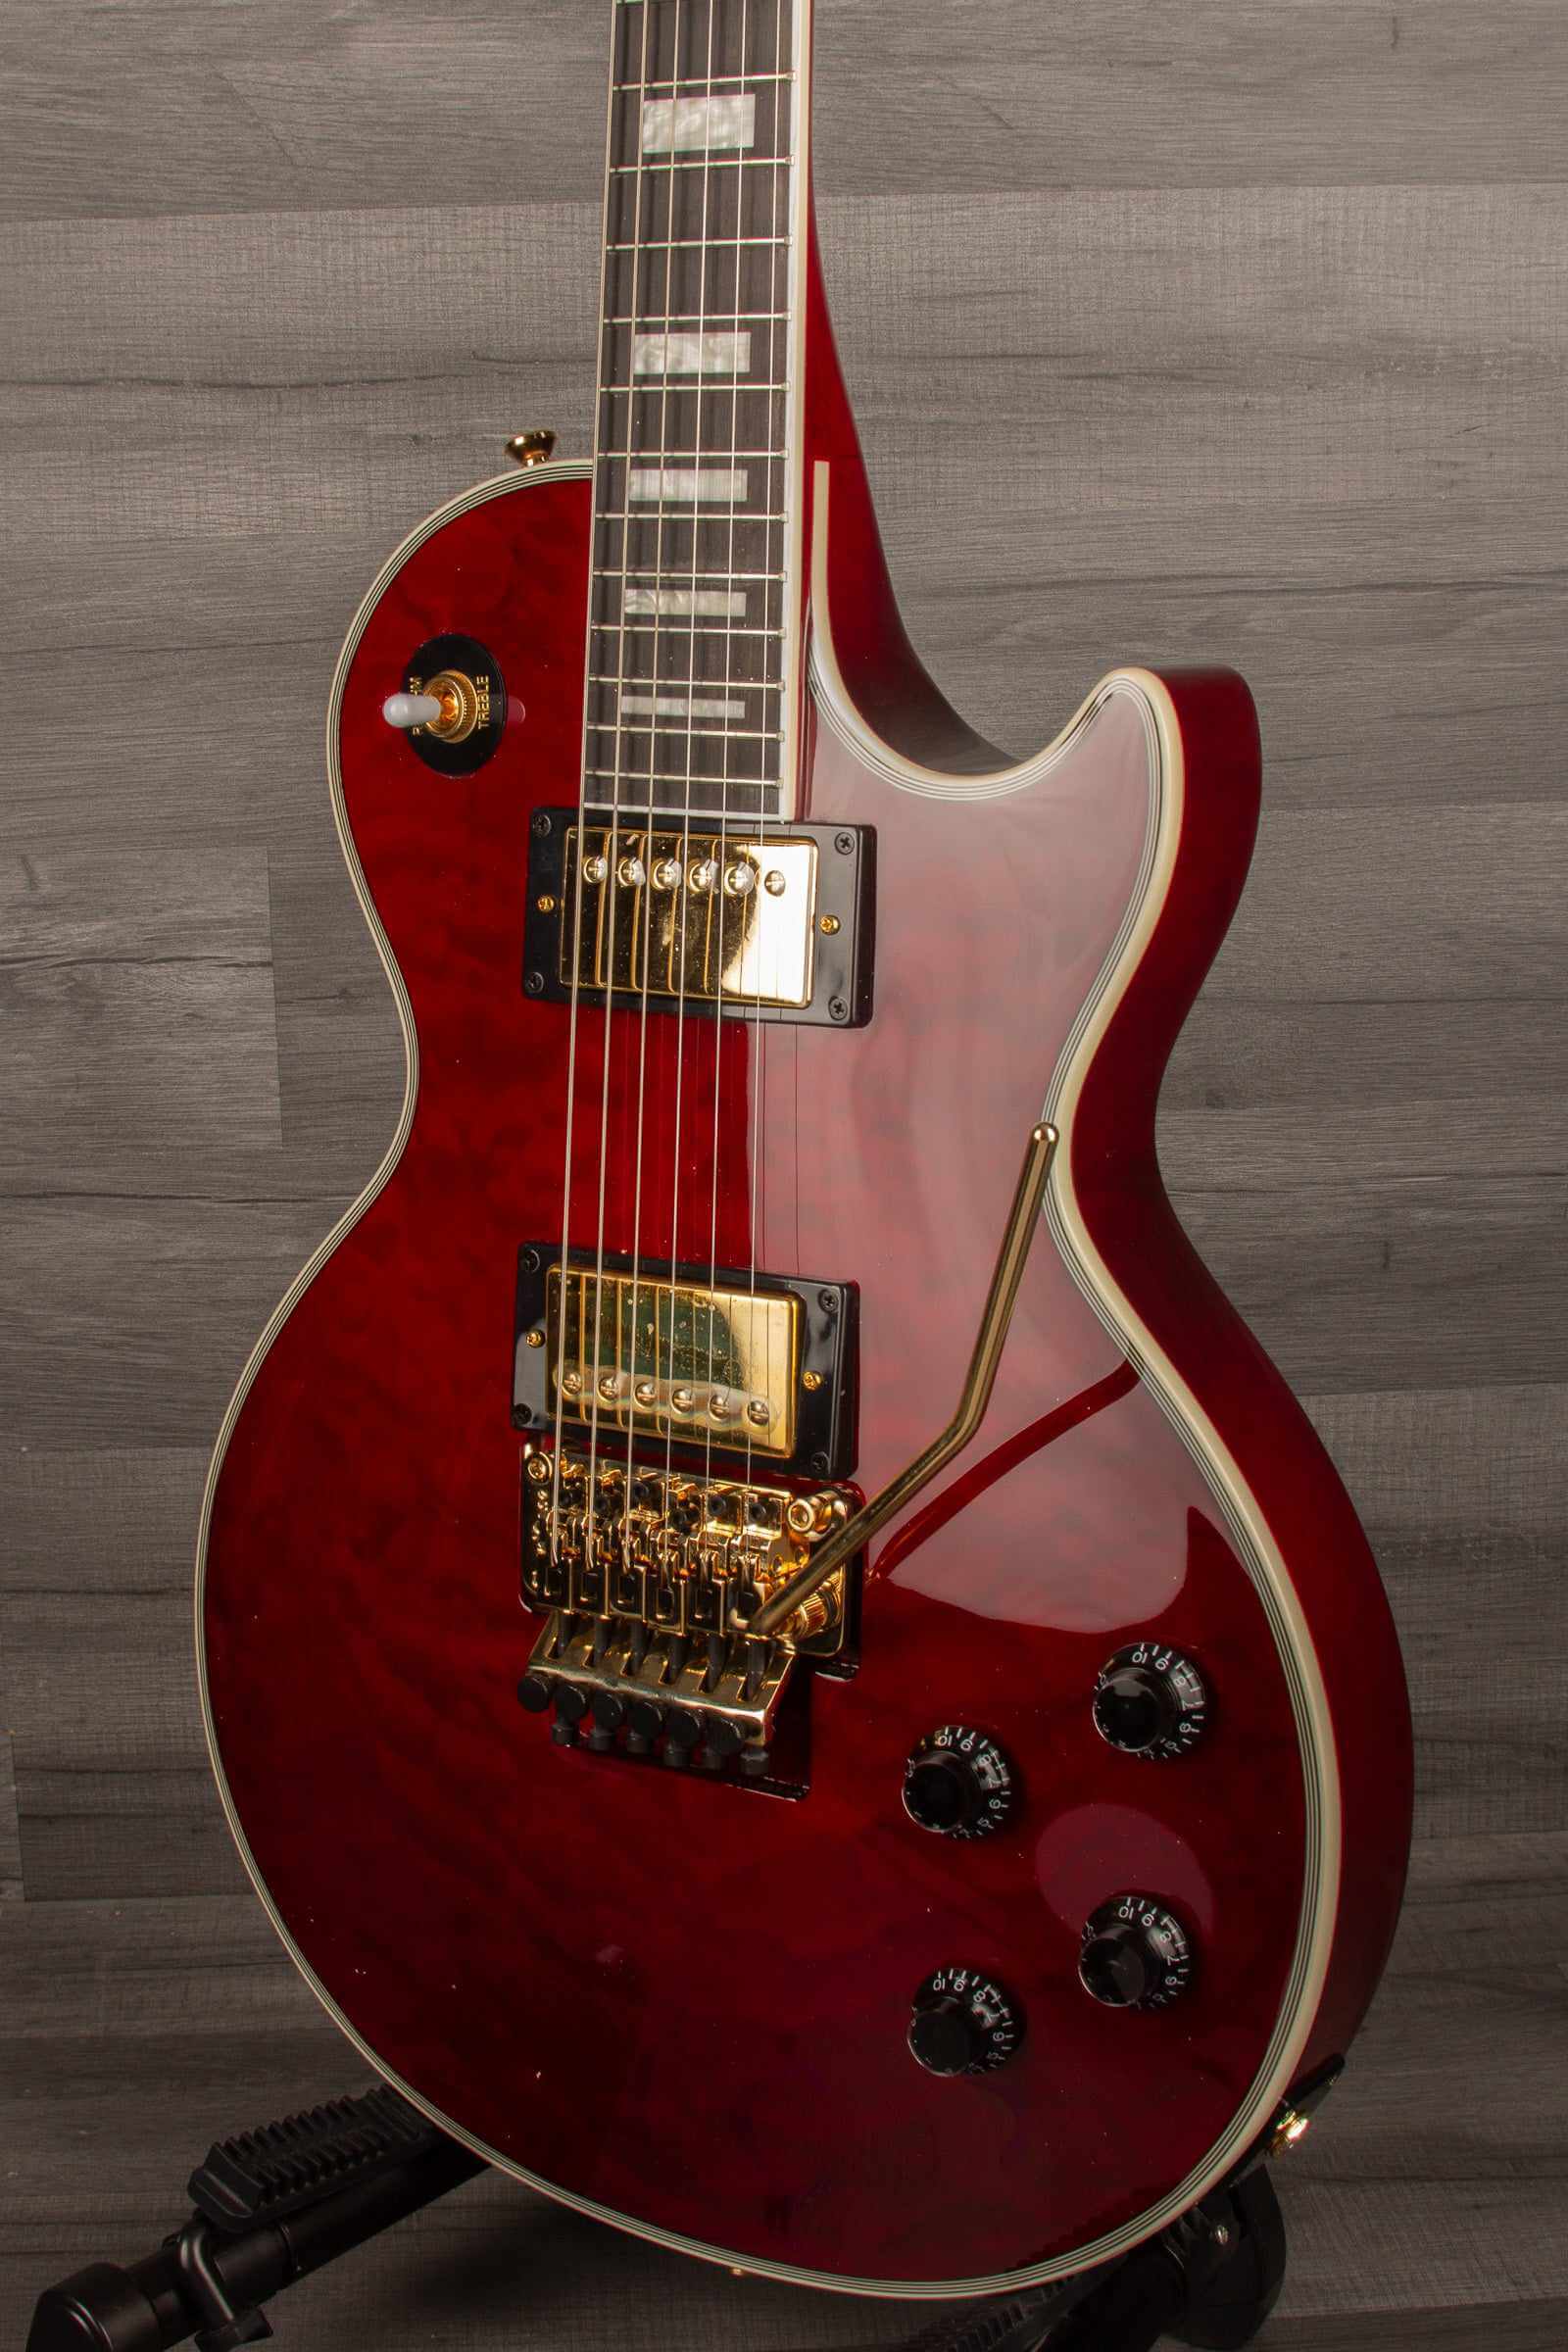 Epiphone Alex Lifeson Les Paul Custom Axcess Quilt - Ruby (Incl. Hard Case) | MusicStreet